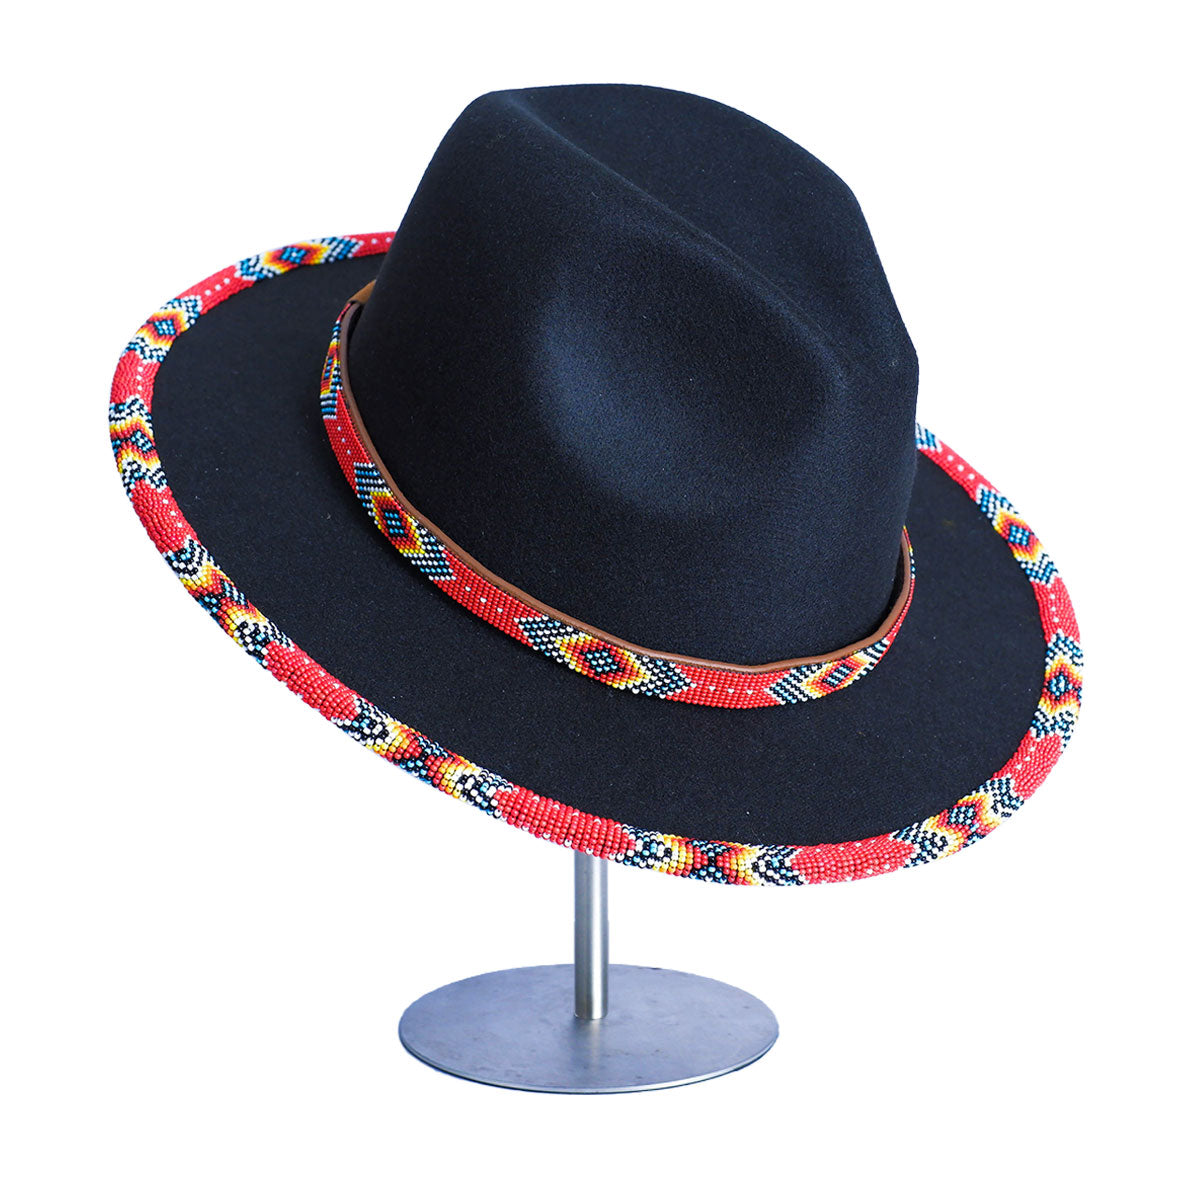 SALE 50% OFF - Red Petals Pattern Fedora Hatband for Men Women Beaded Brim with Native American Style